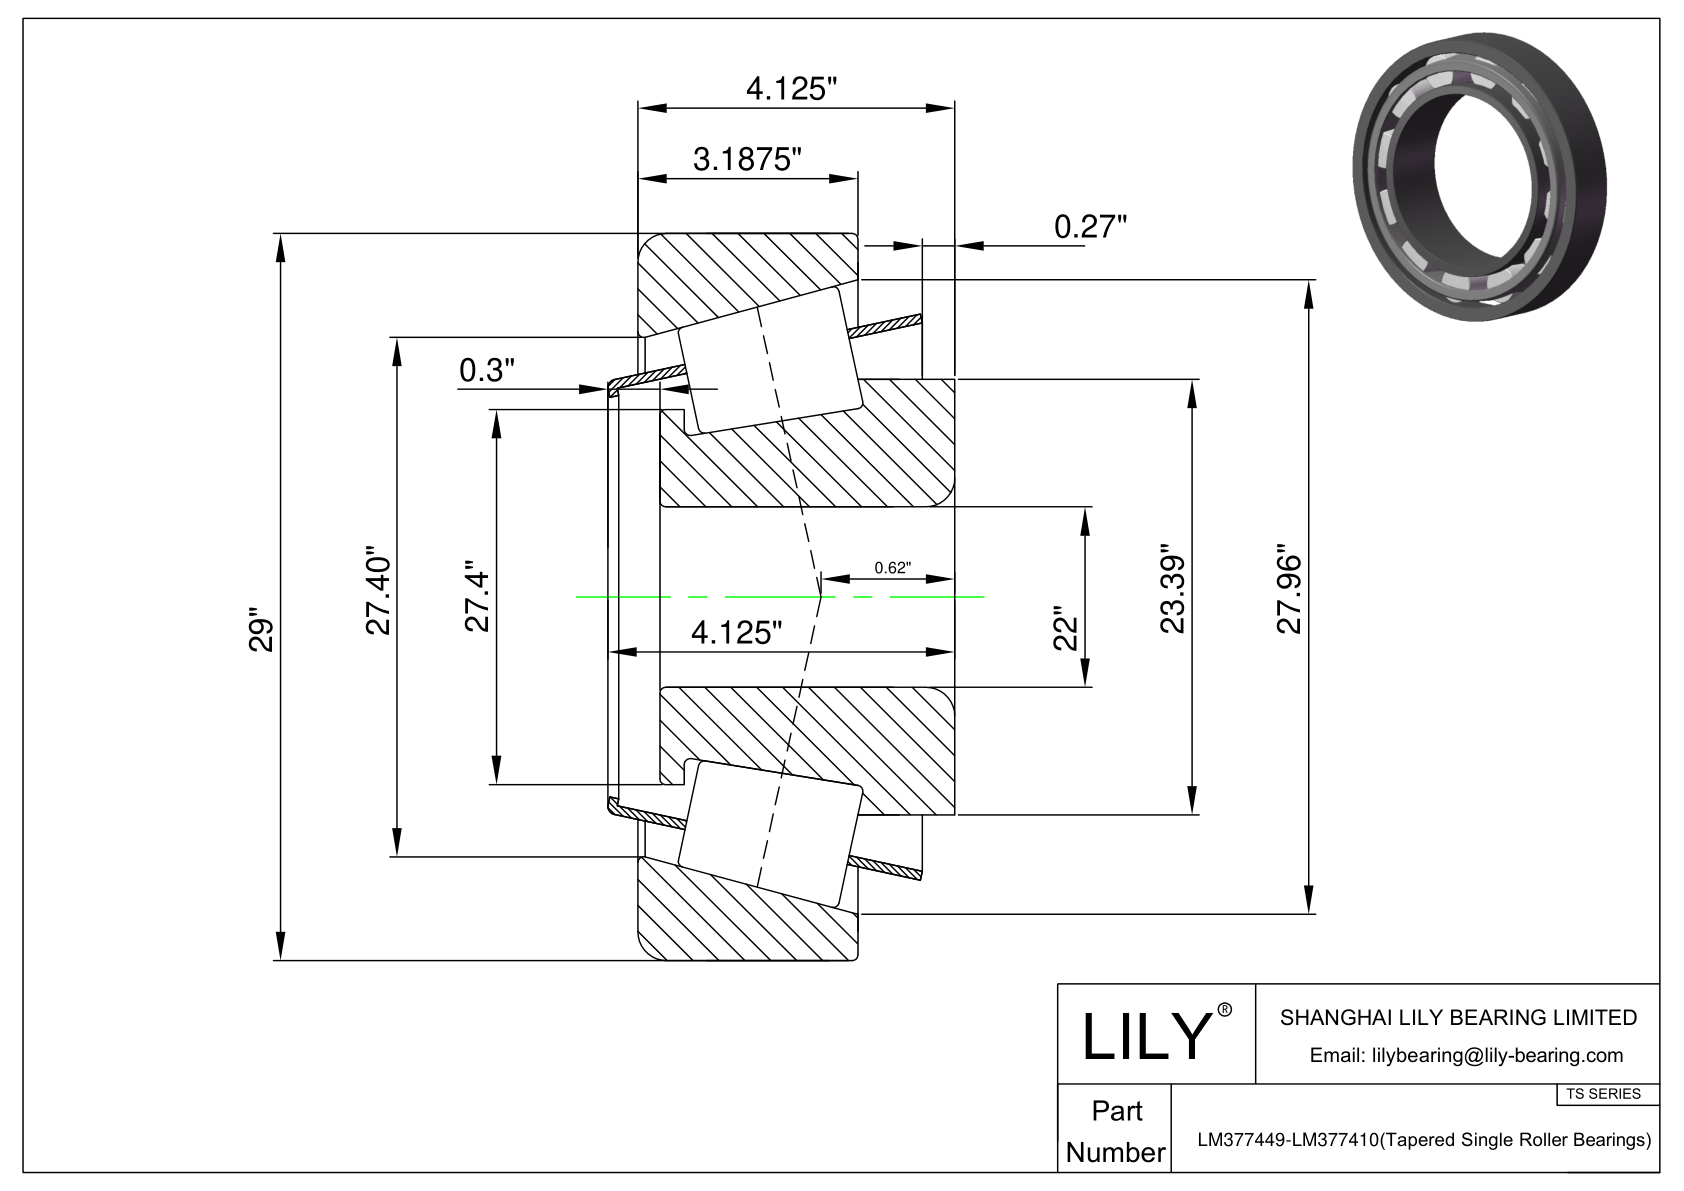 LM377449-LM377410 TS (Tapered Single Roller Bearings) (Imperial) cad drawing